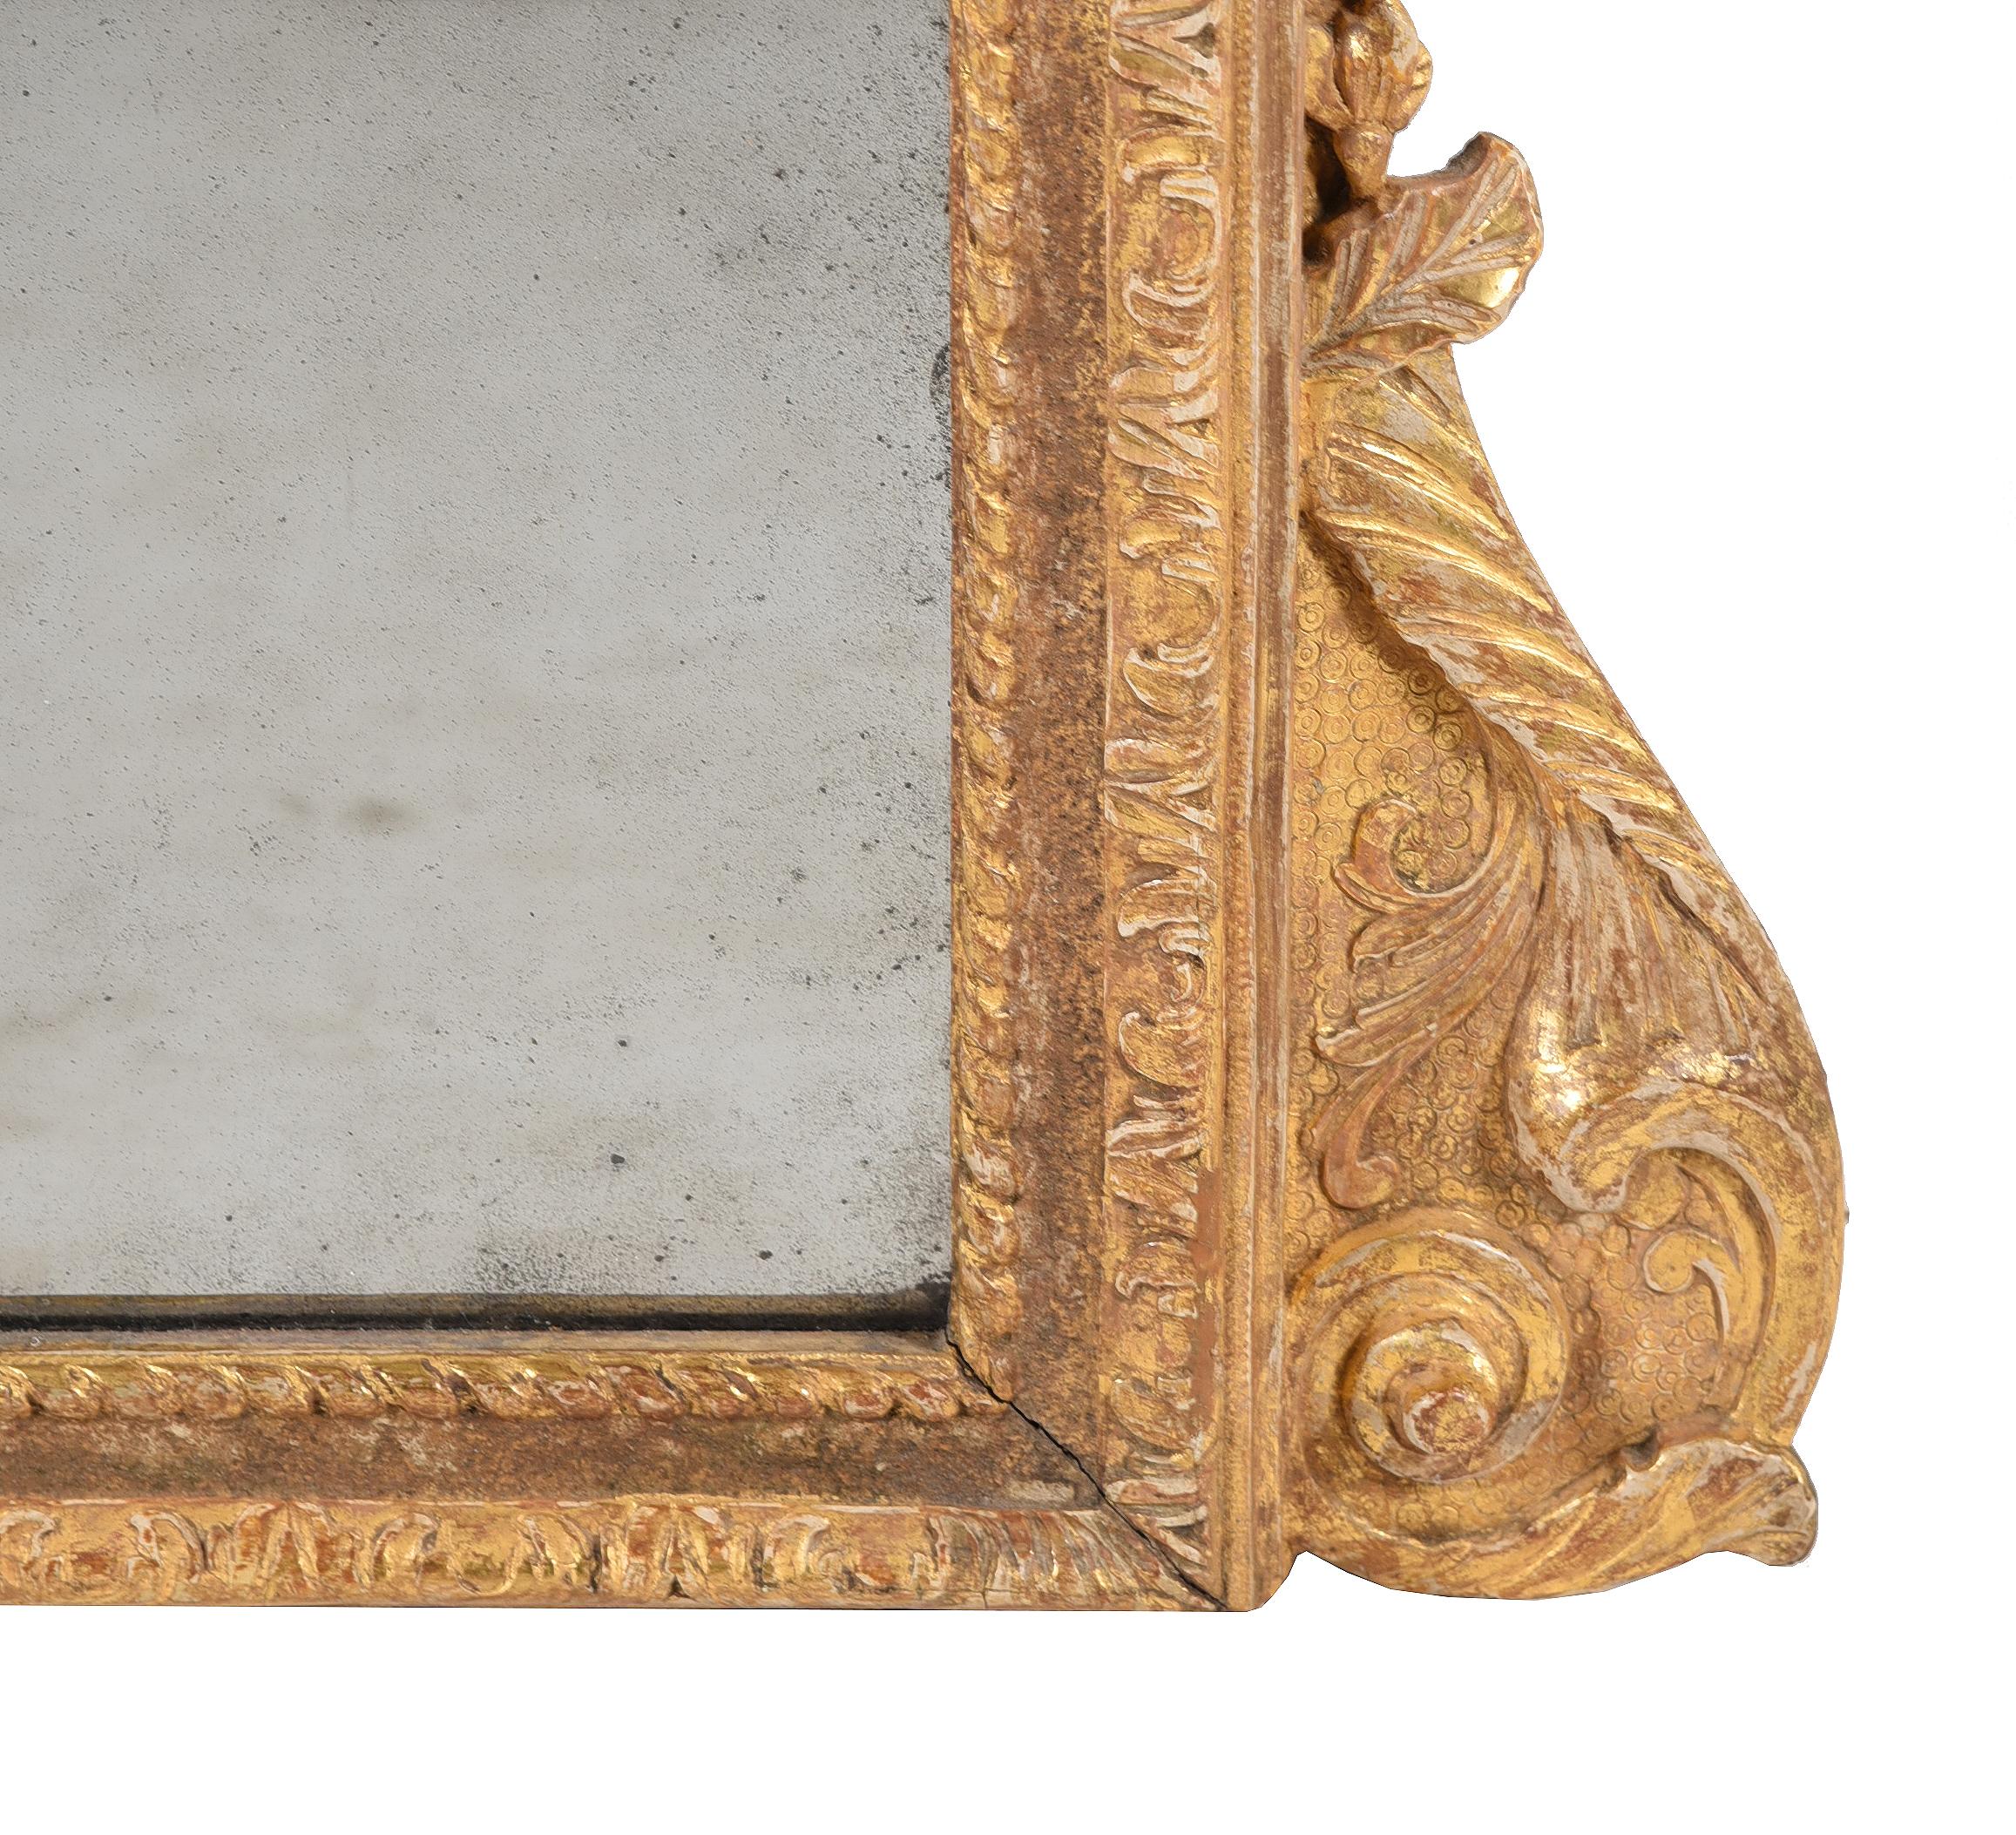 A Large 18th Century George I Gilt-Gesso Pier Glass, Attributed to John Belchier In Good Condition For Sale In Oxfordshire, United Kingdom